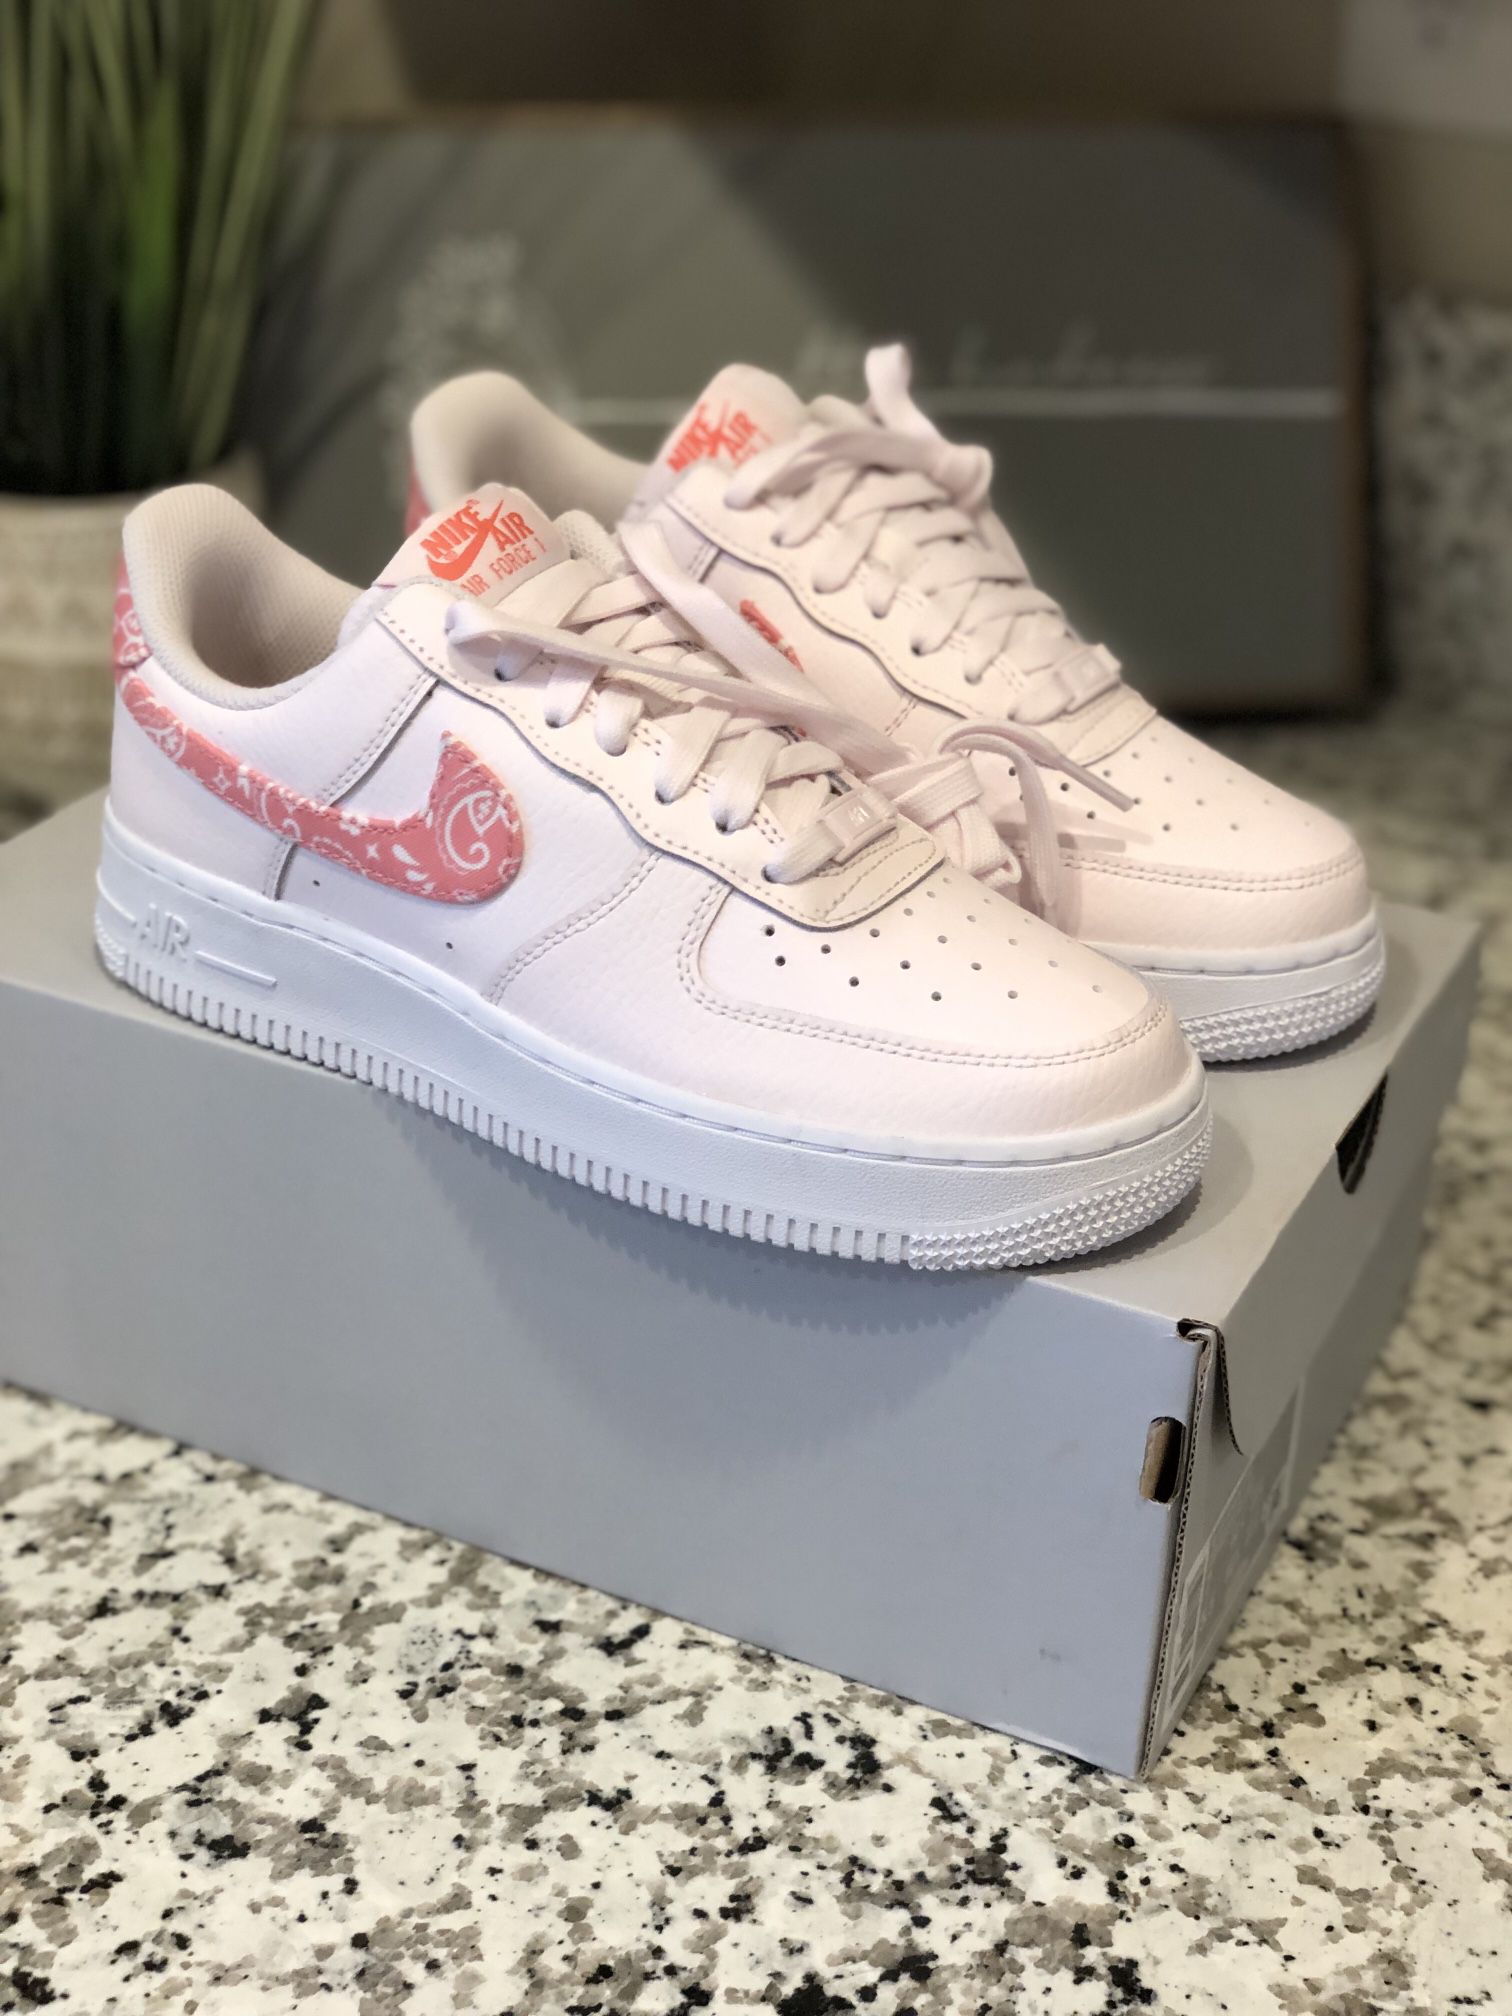 Nike Air Force 1 Pink Paisley Sz7w 5.5y for Sale in Reedley, CA - OfferUp